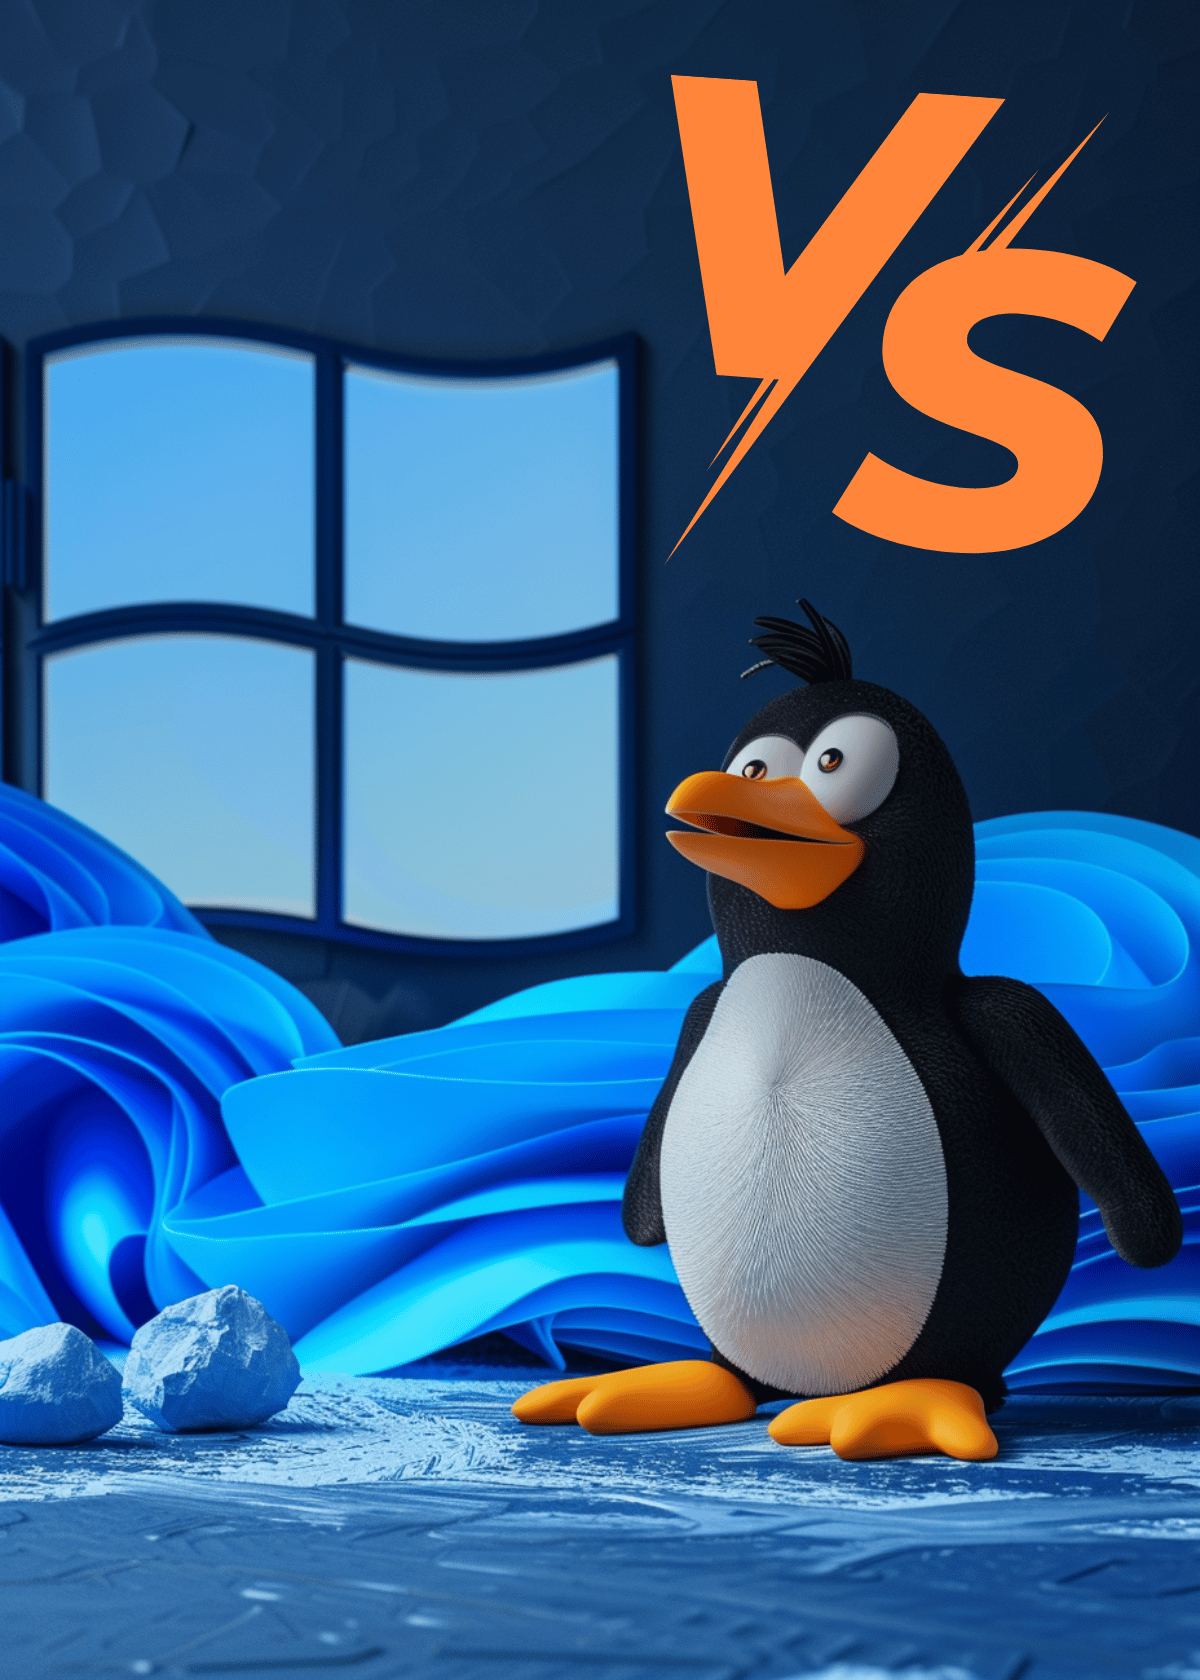 Why Choose Linux over Windows?